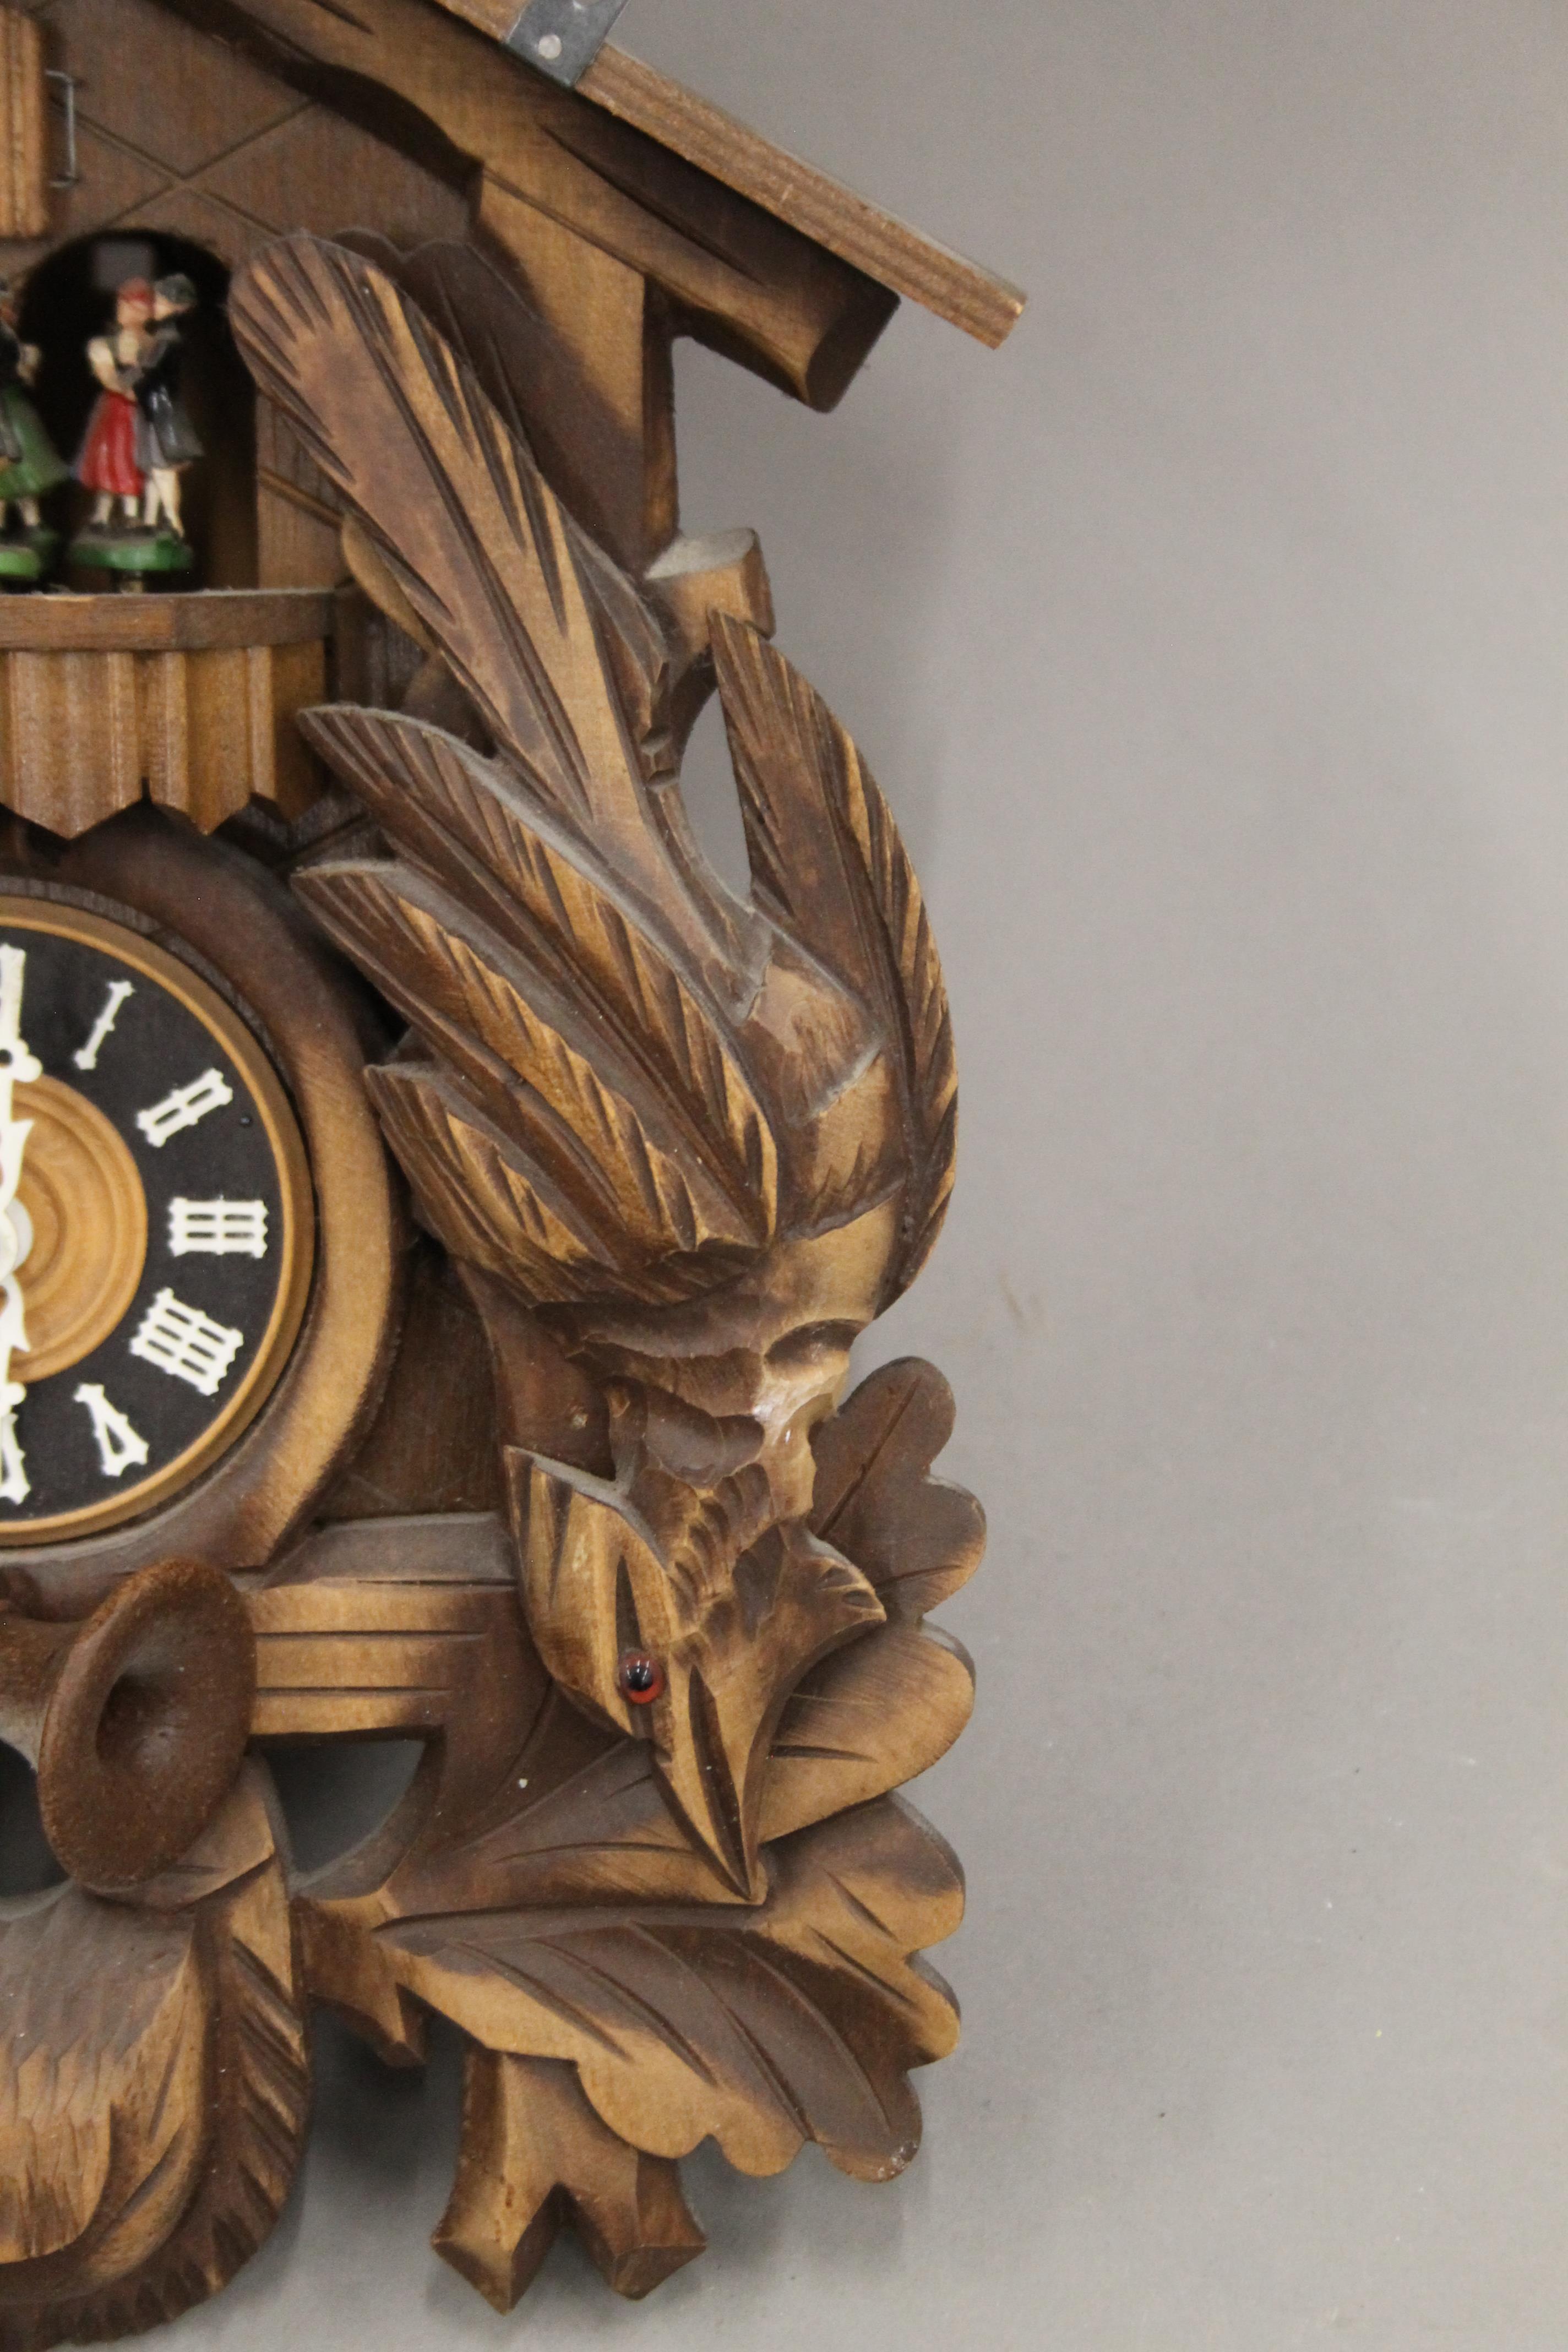 A Blackforest cuckoo clock with roundabout. Approximately 49 cm high. - Image 6 of 9